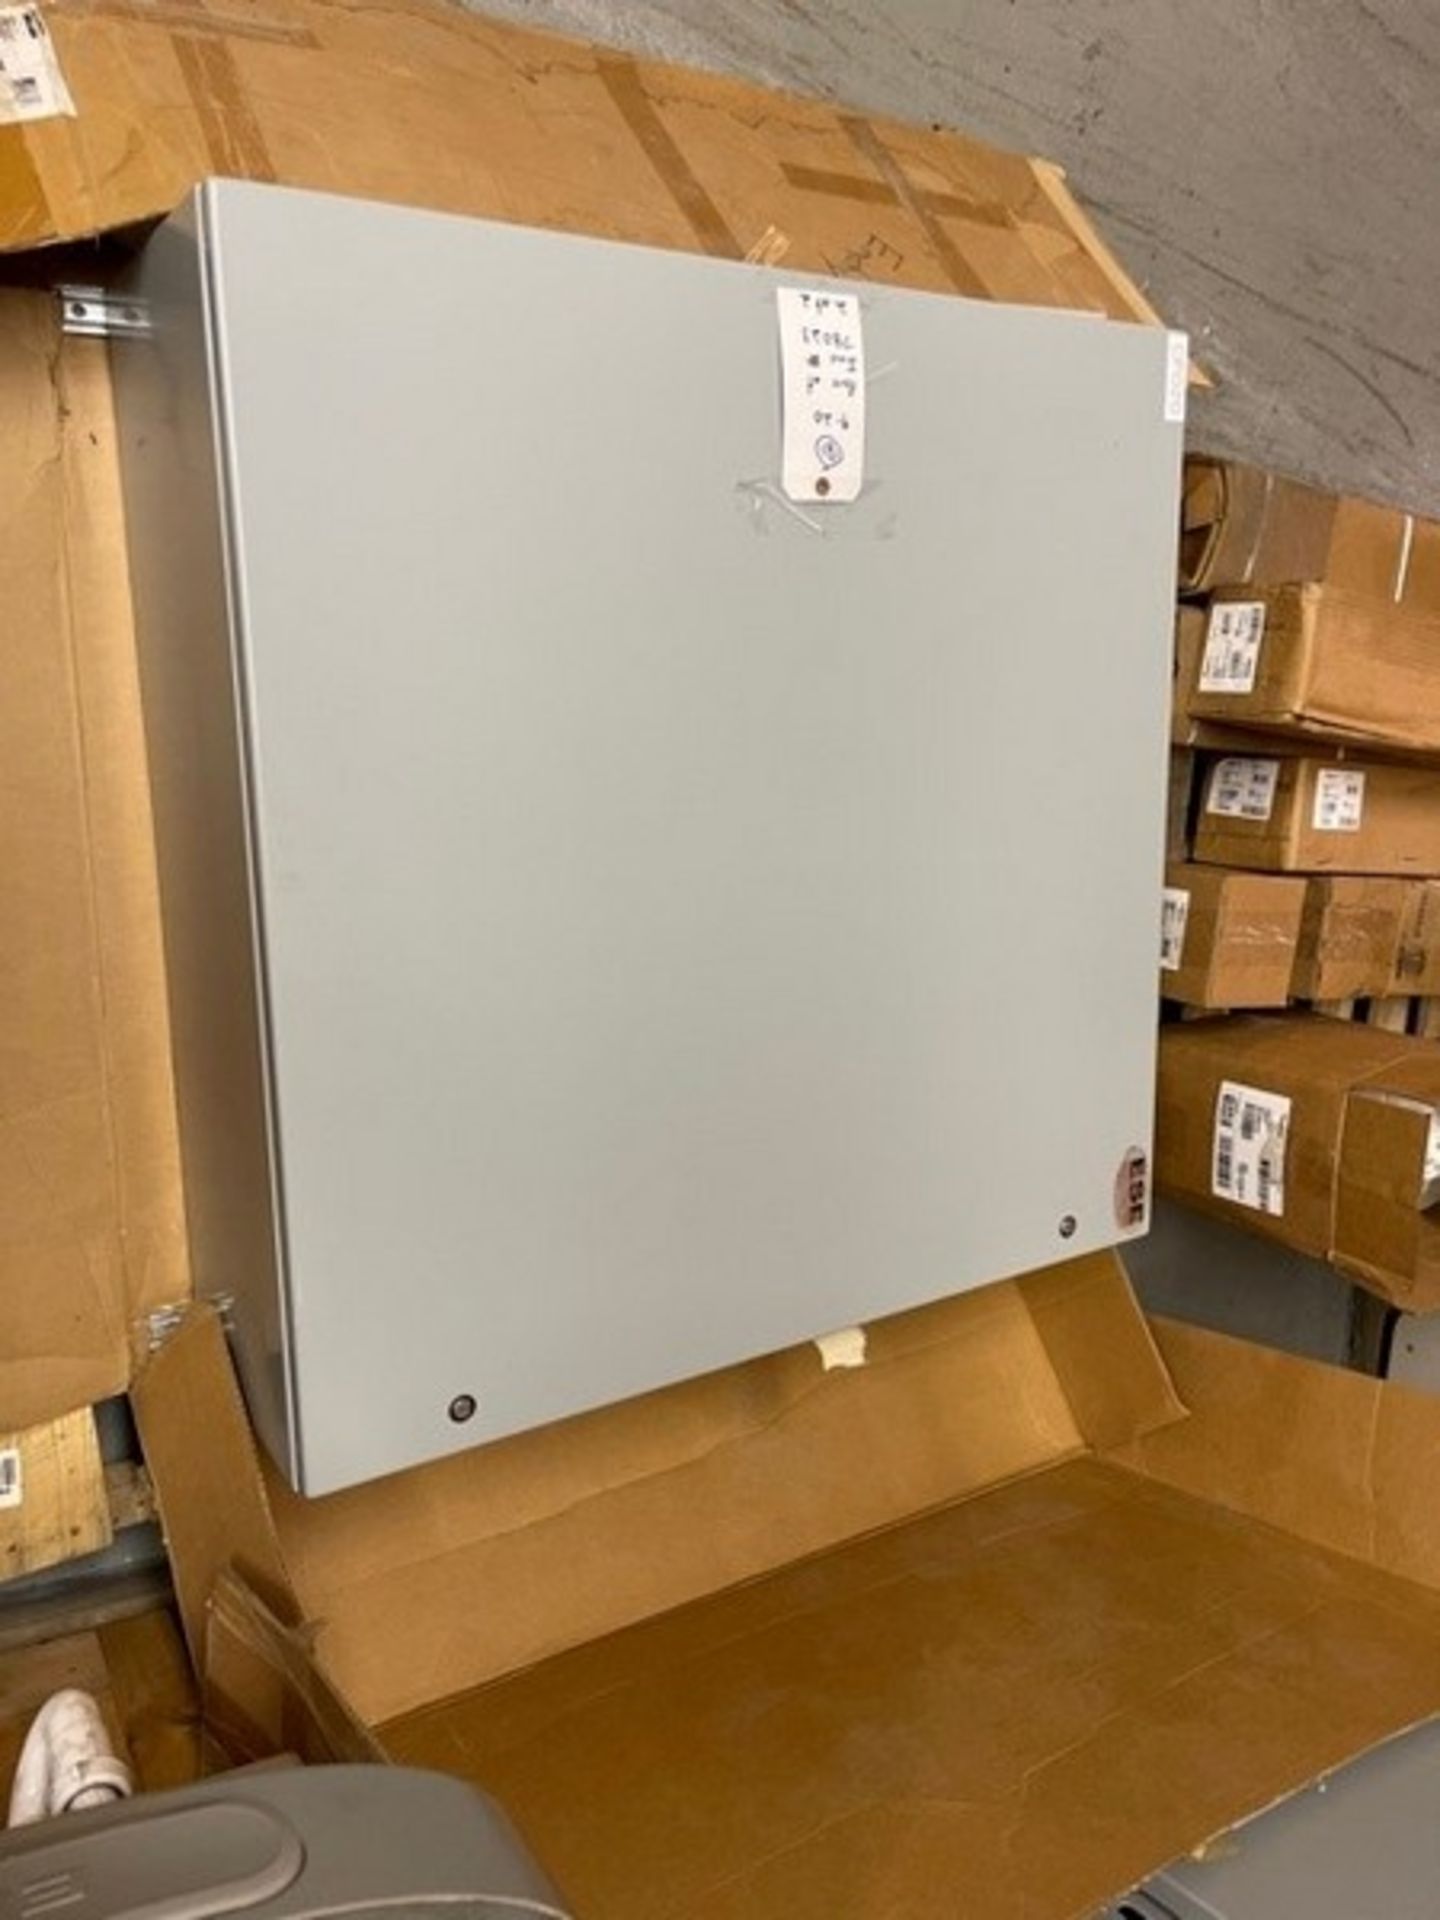 Lot of (2) New Hoffman Control Panel Enclosures, Including Sizes 37" W x 48" H x 12" Deep & 36" W